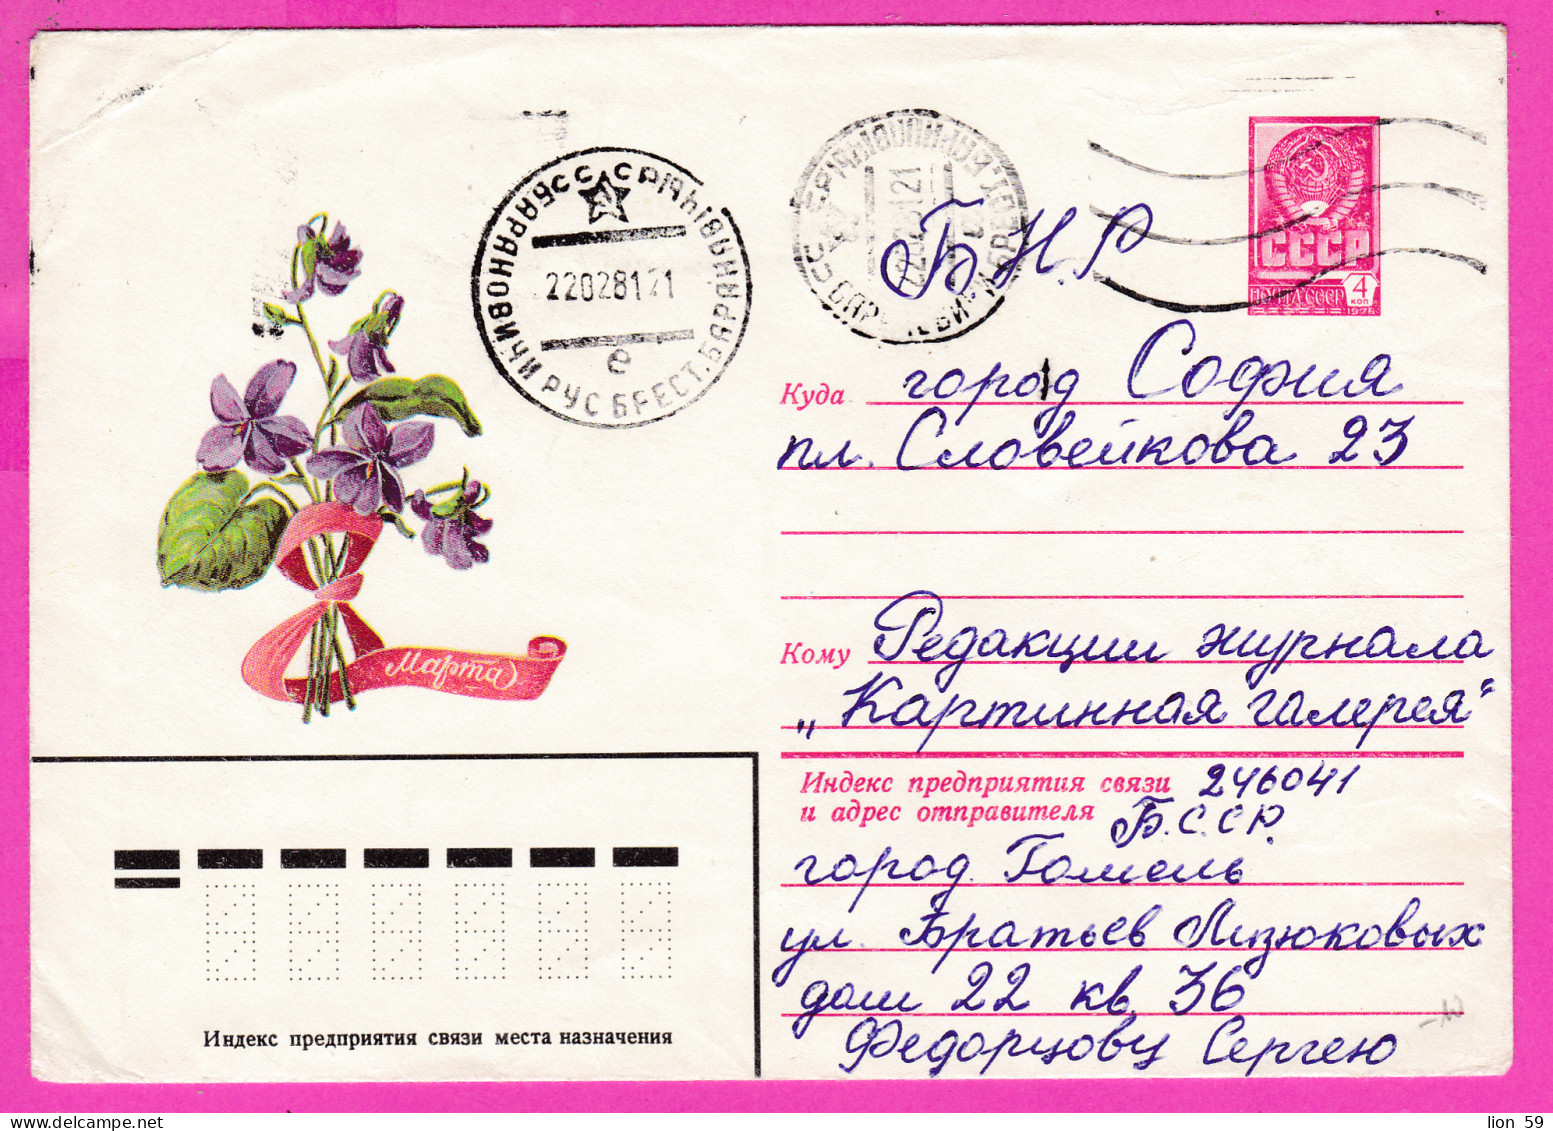 296609 / Russia 1979 - 4 K. - March 8 International Women's Day Flowers, Belarus Gomel Baranavichy - BG Stationery Cover - Mother's Day